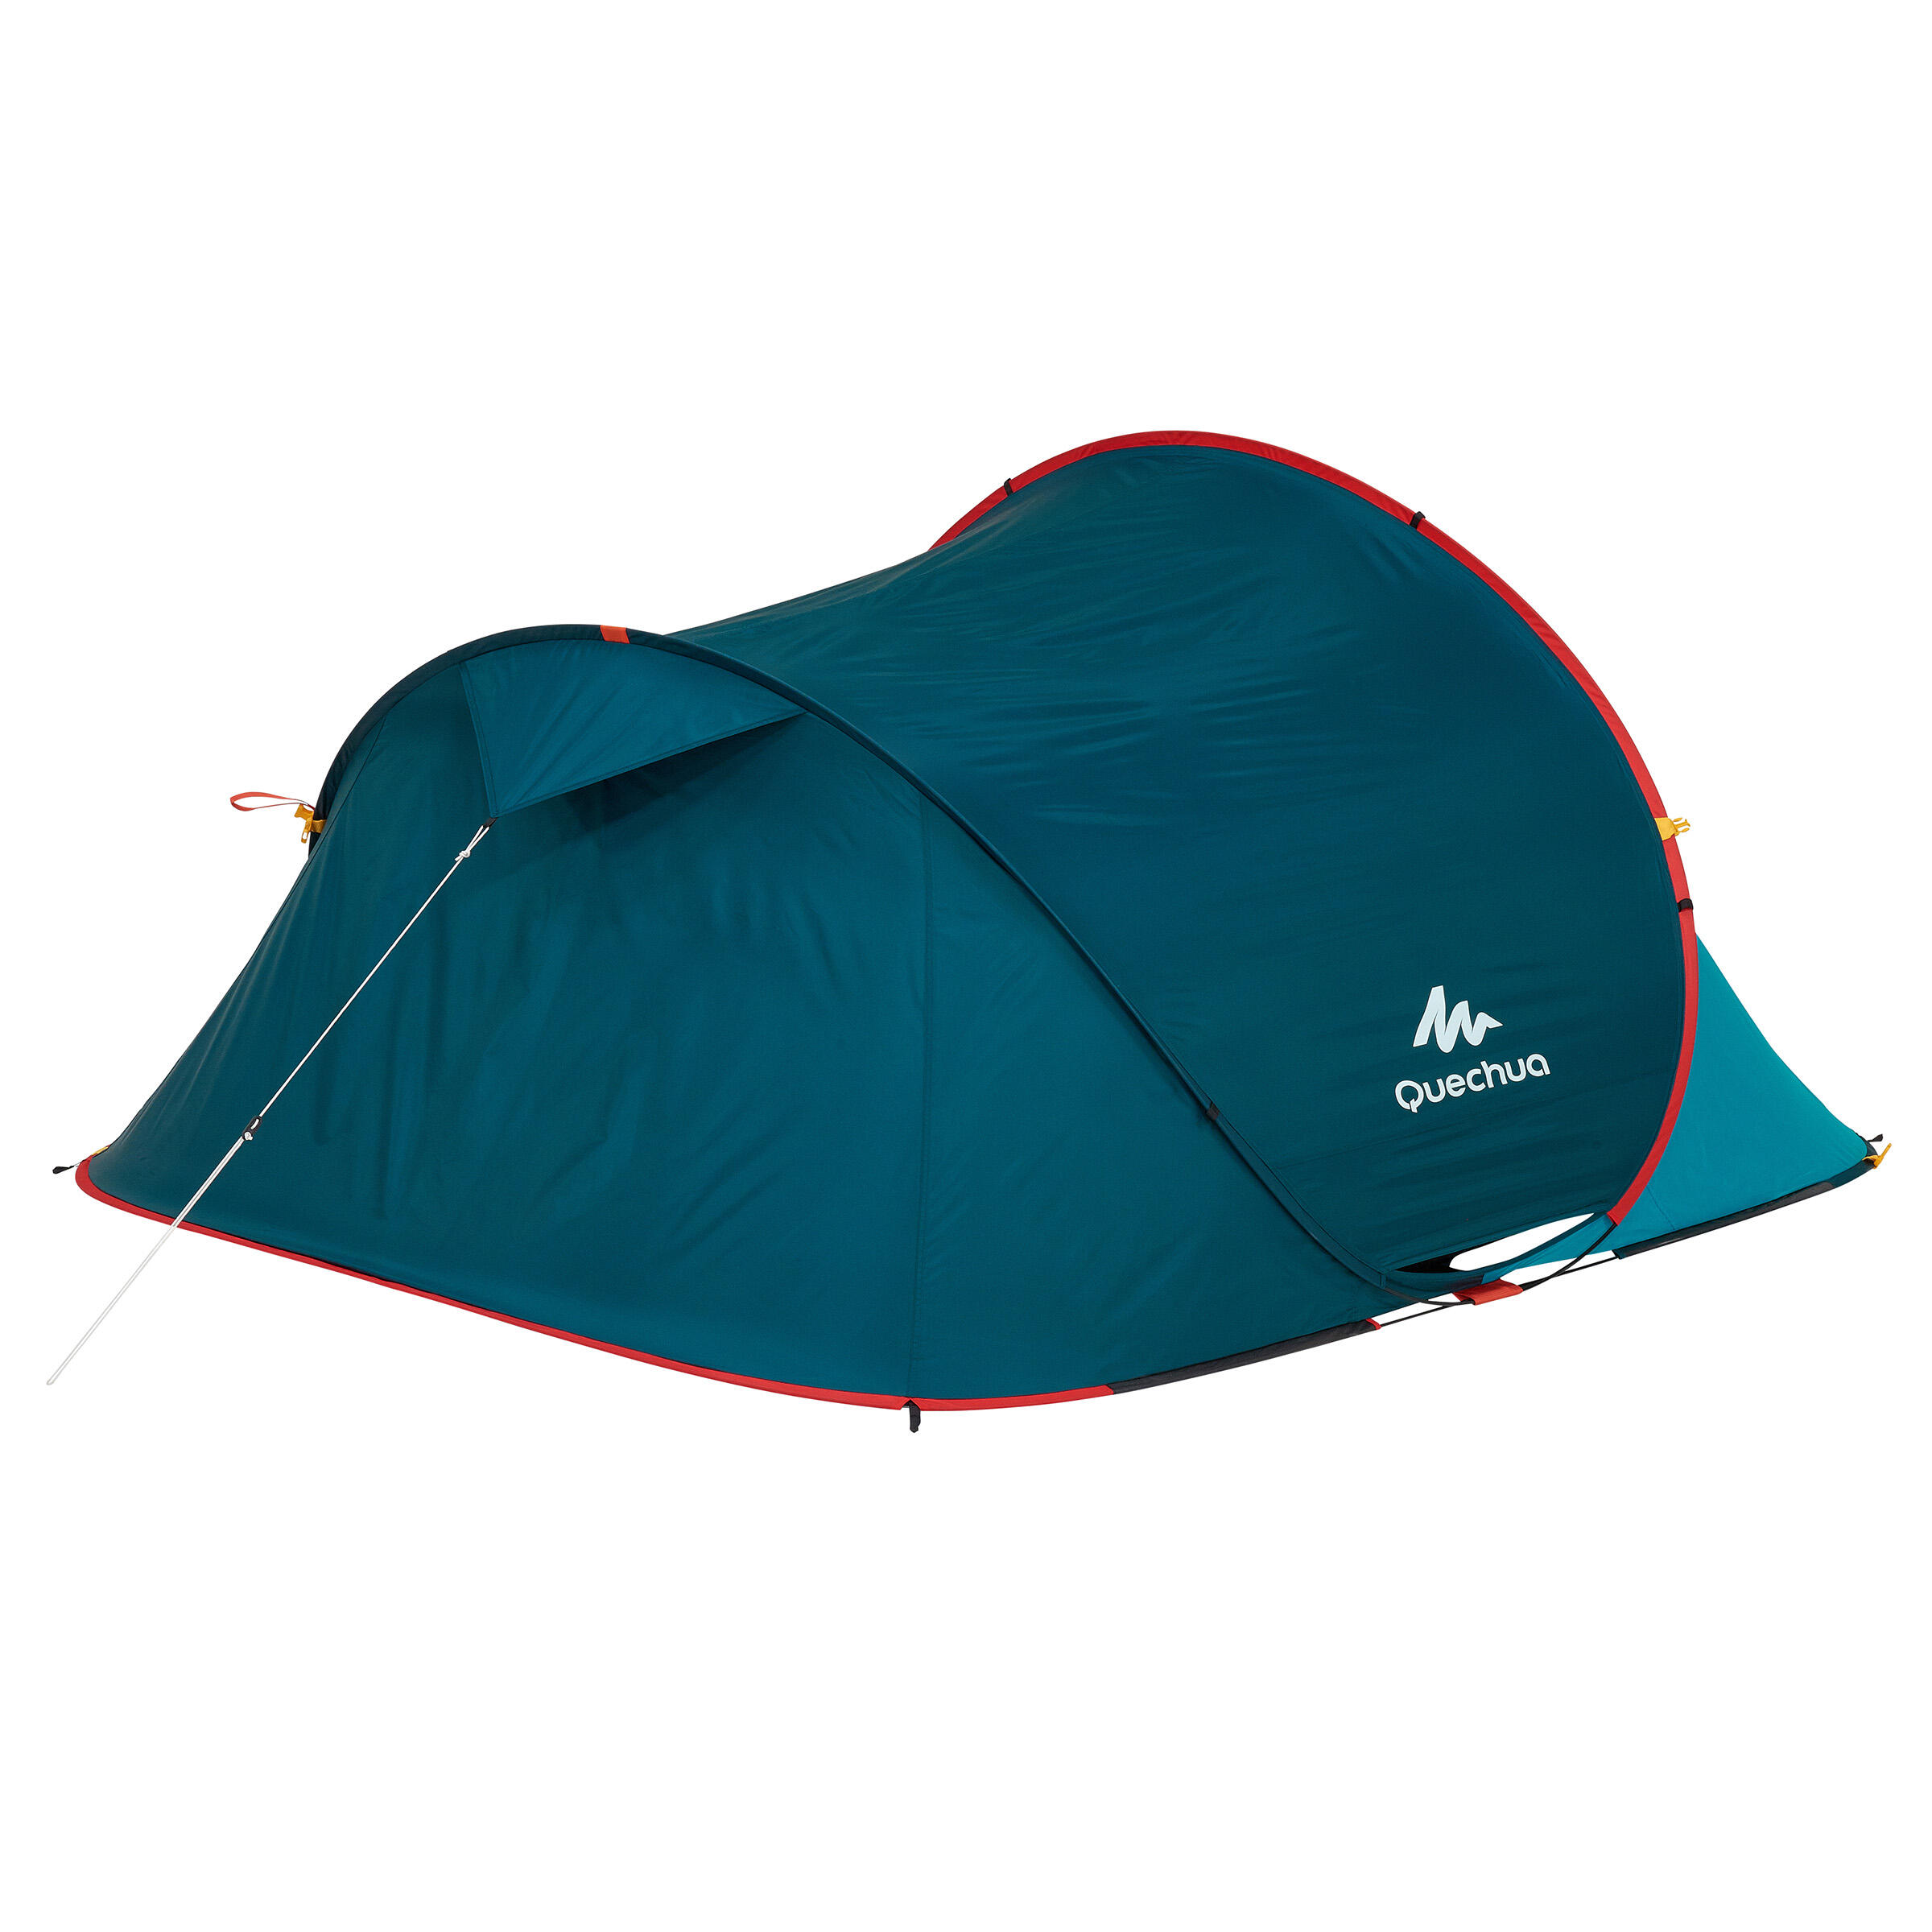 2 seconds EASY 3 Tent blue - 3 people 